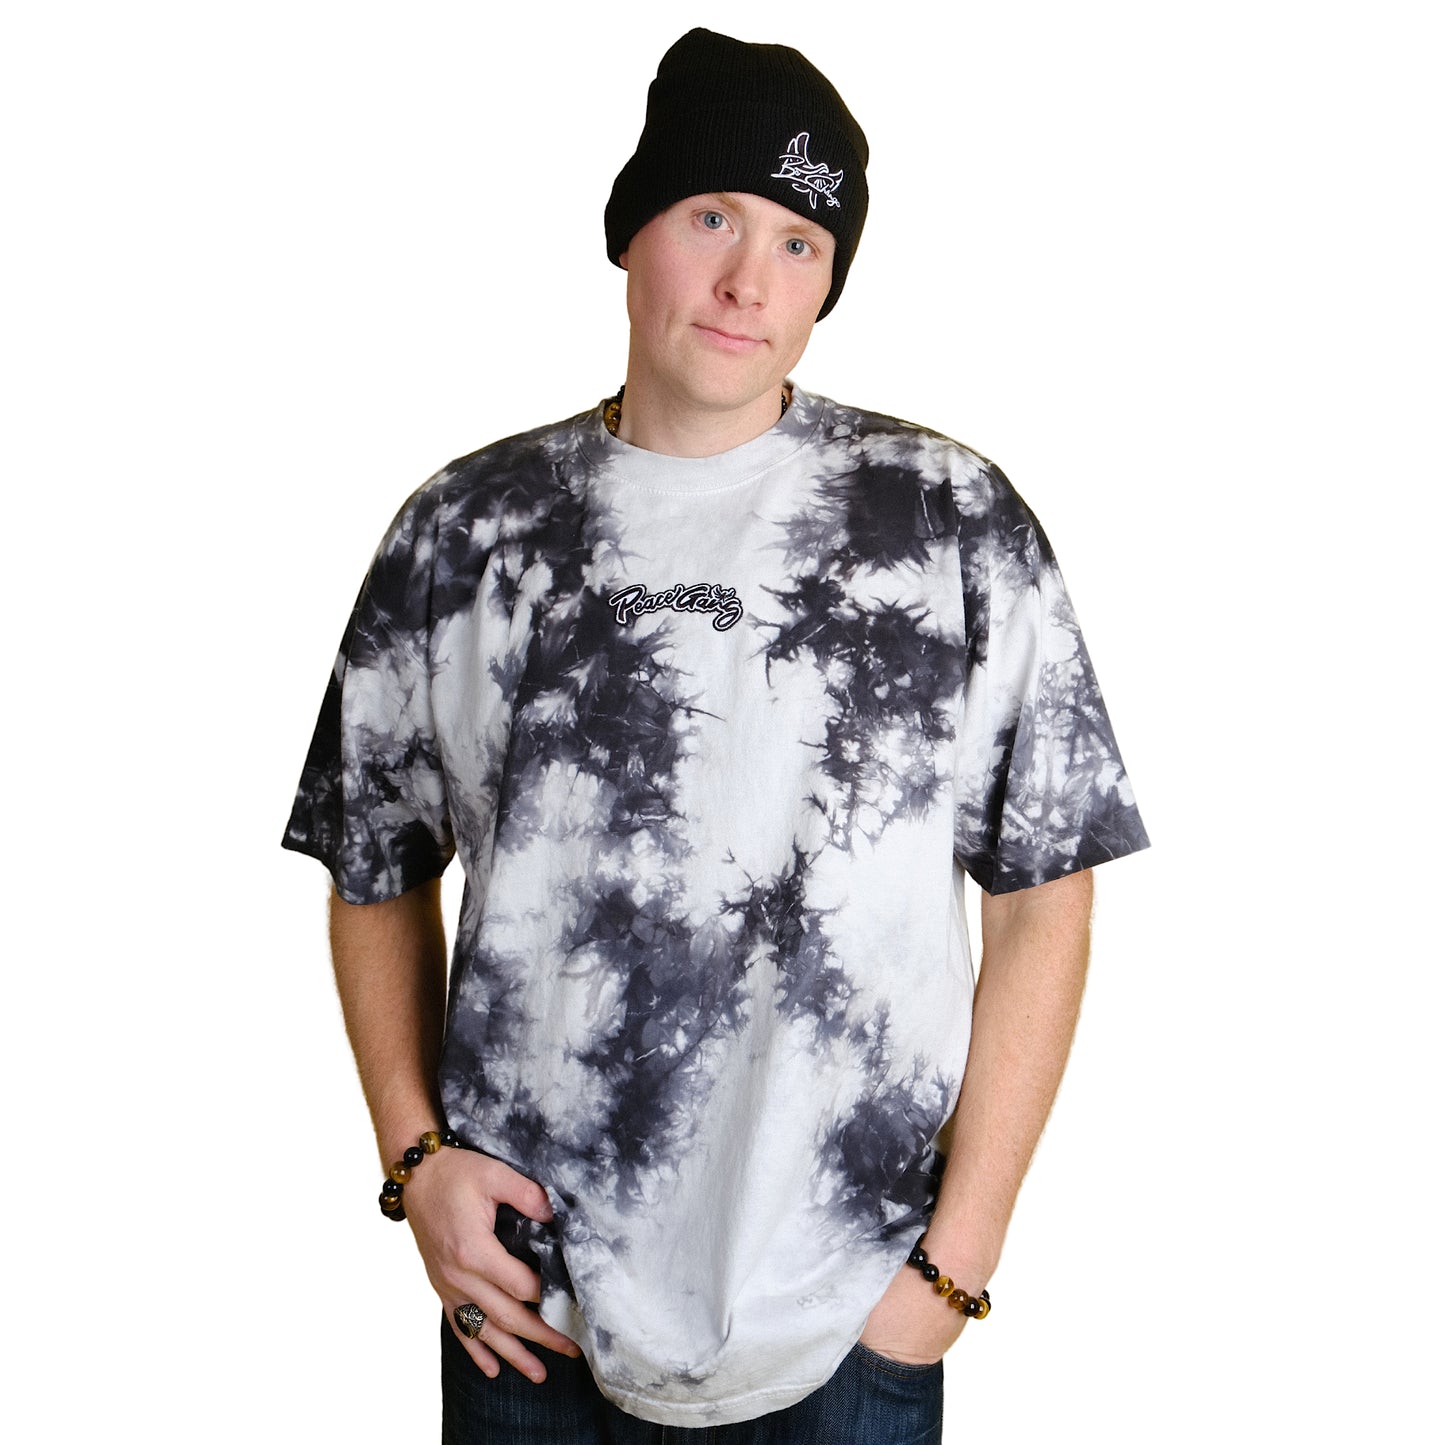 Embroidered Oversized tie-dye t-shirt - PEACE GANG Cursive